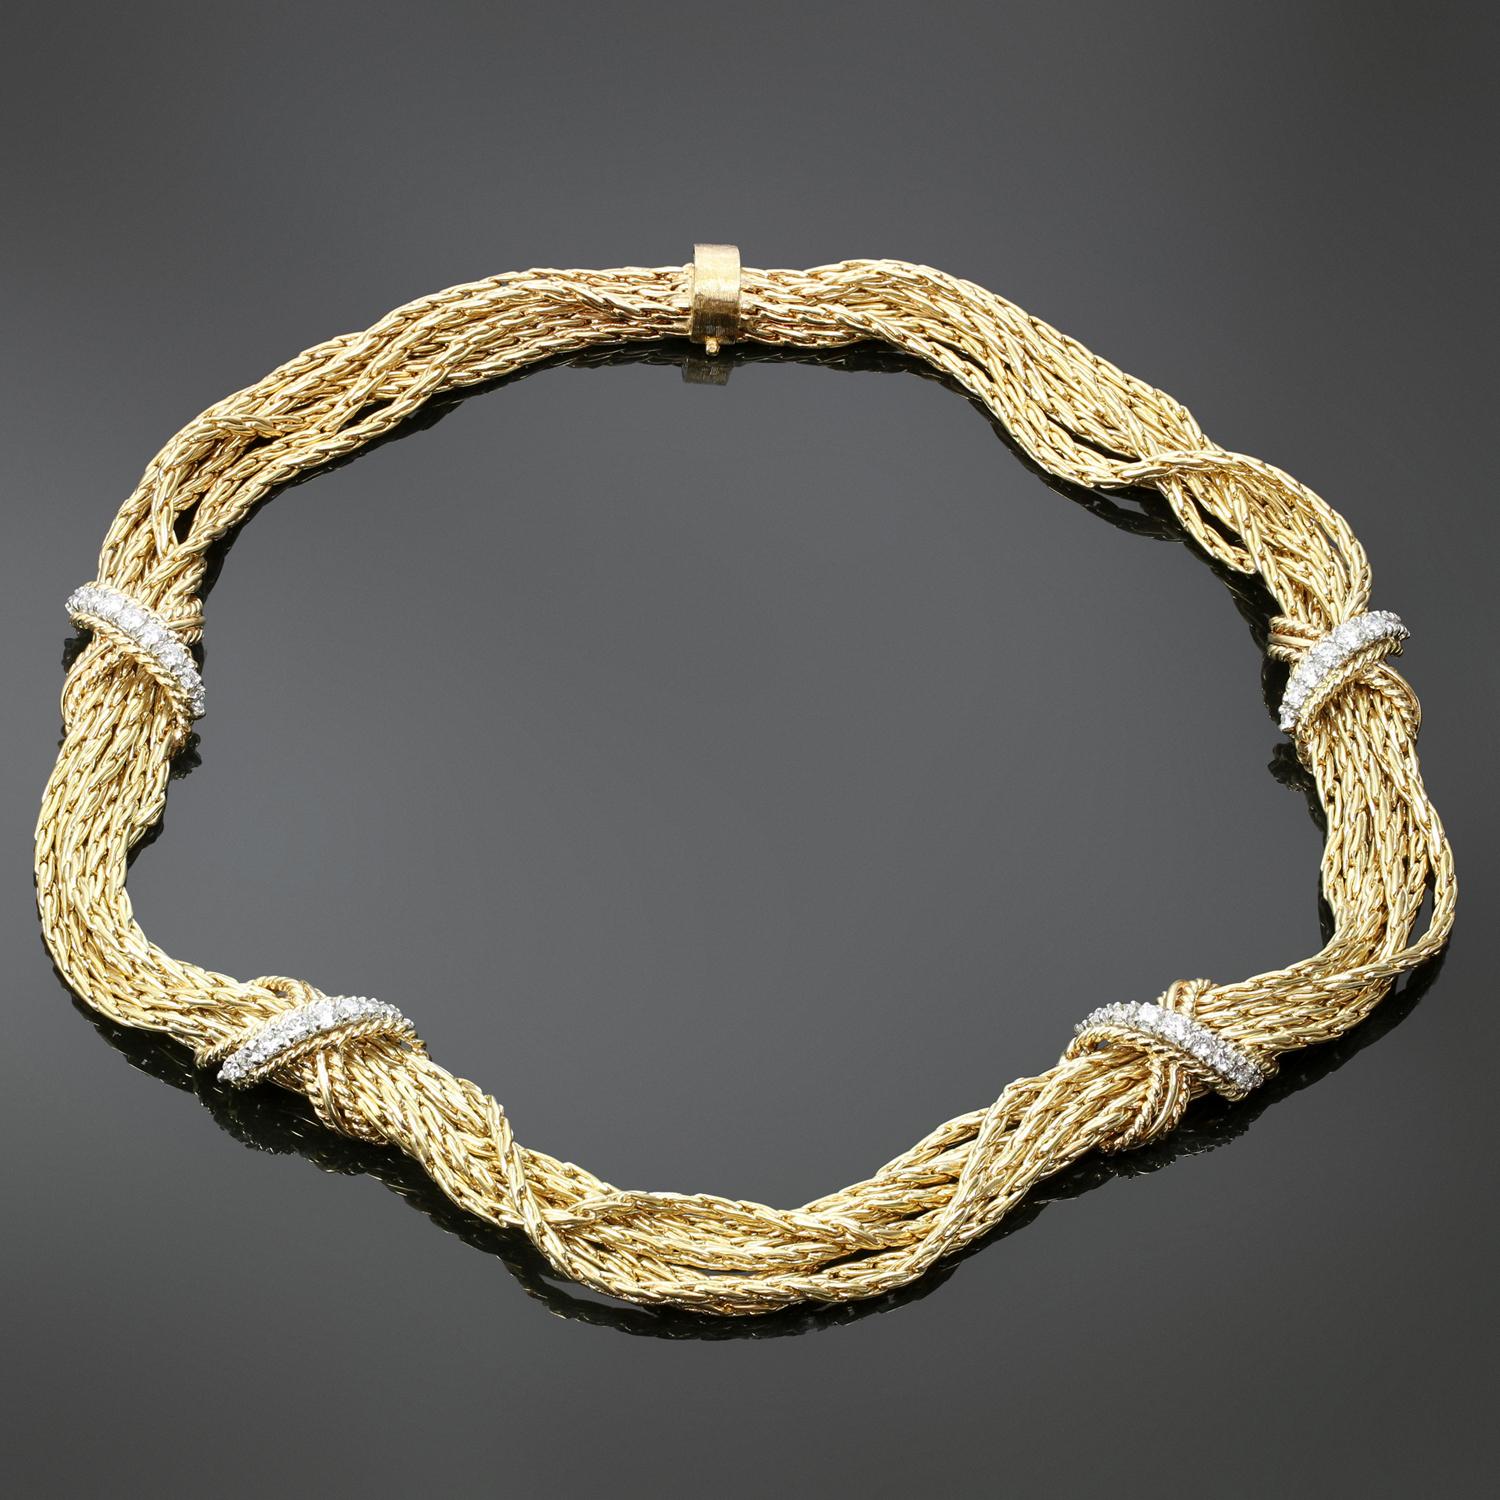 This rare and authentic Tiffany multi-strand necklace features a 7-row rope design crafted in 14k yellow gold and accented with four X elements set with 36 brilliant-cut round diamonds in white gold, weighing an estimated 1.20 carats. Made in United